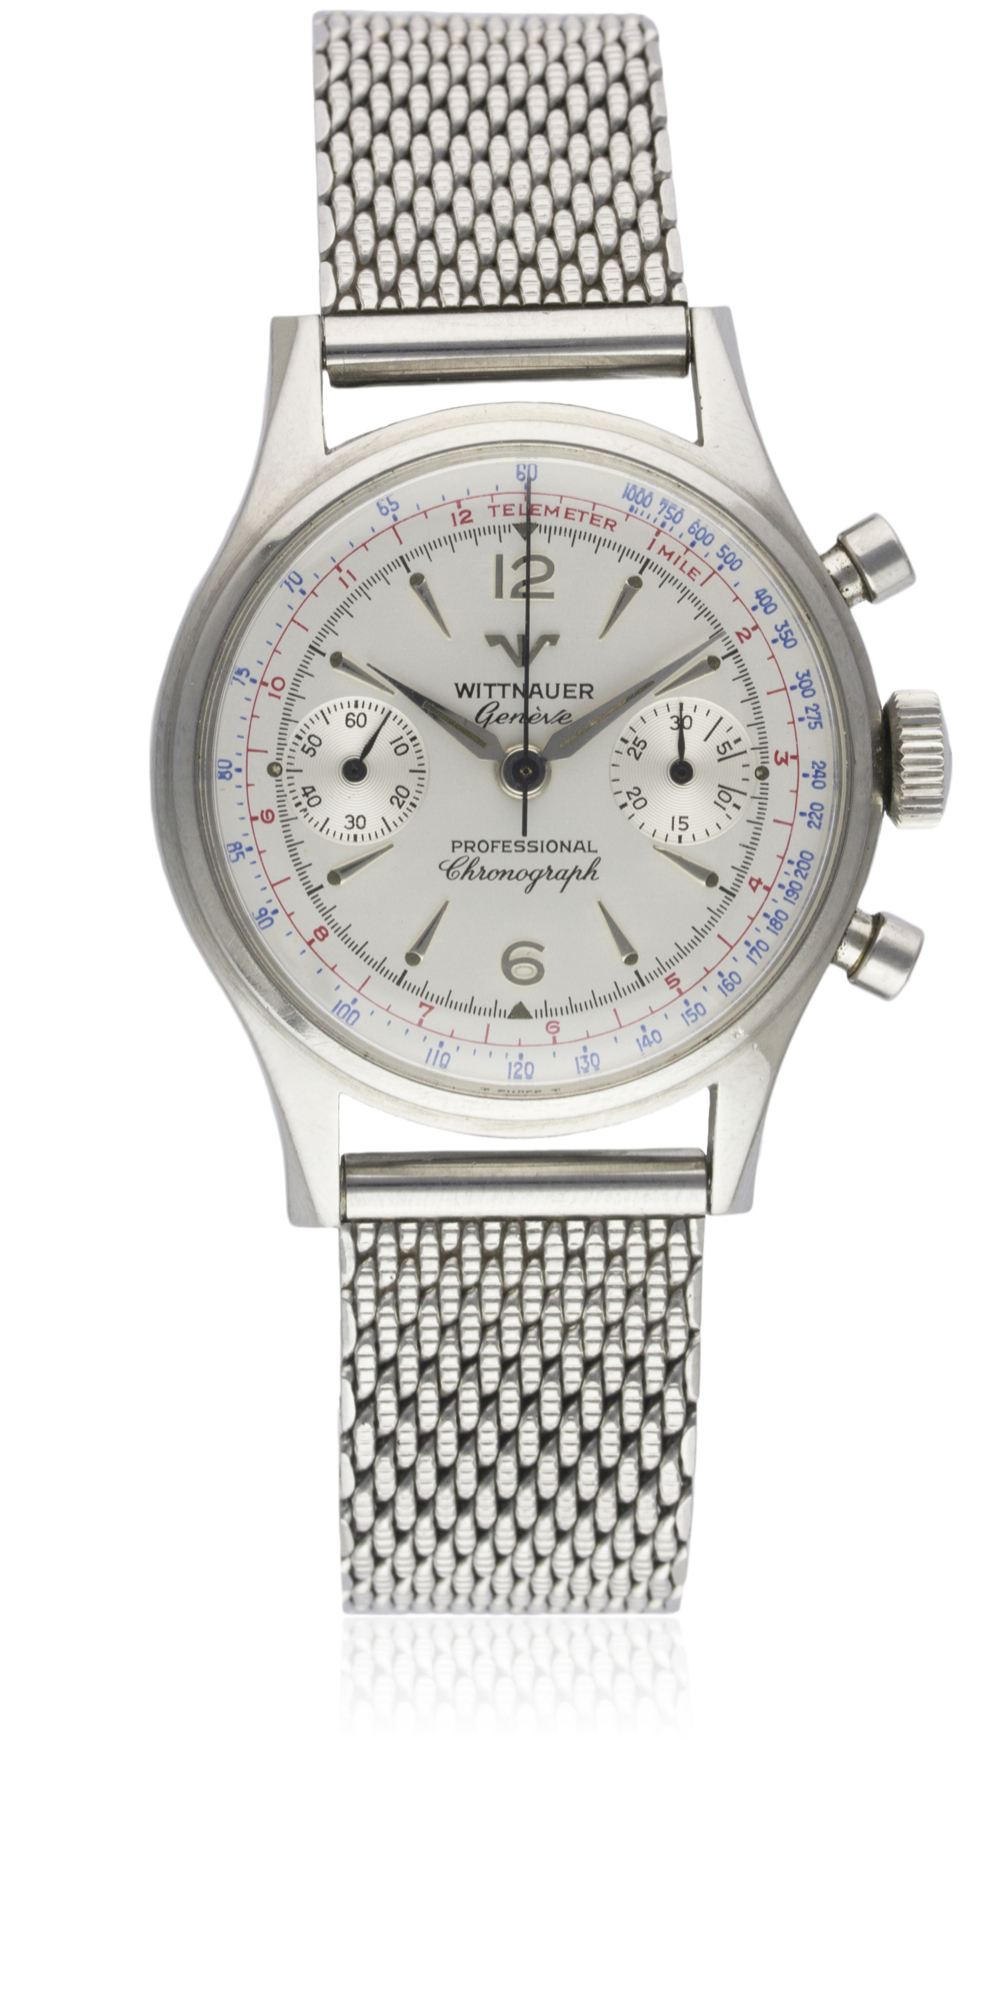 A GENTLEMAN'S STAINLESS STEEL WITTNAUER PROFESSIONAL CHRONOGRAPH BRACELET WATCH CIRCA 1960s, REF. - Image 2 of 11